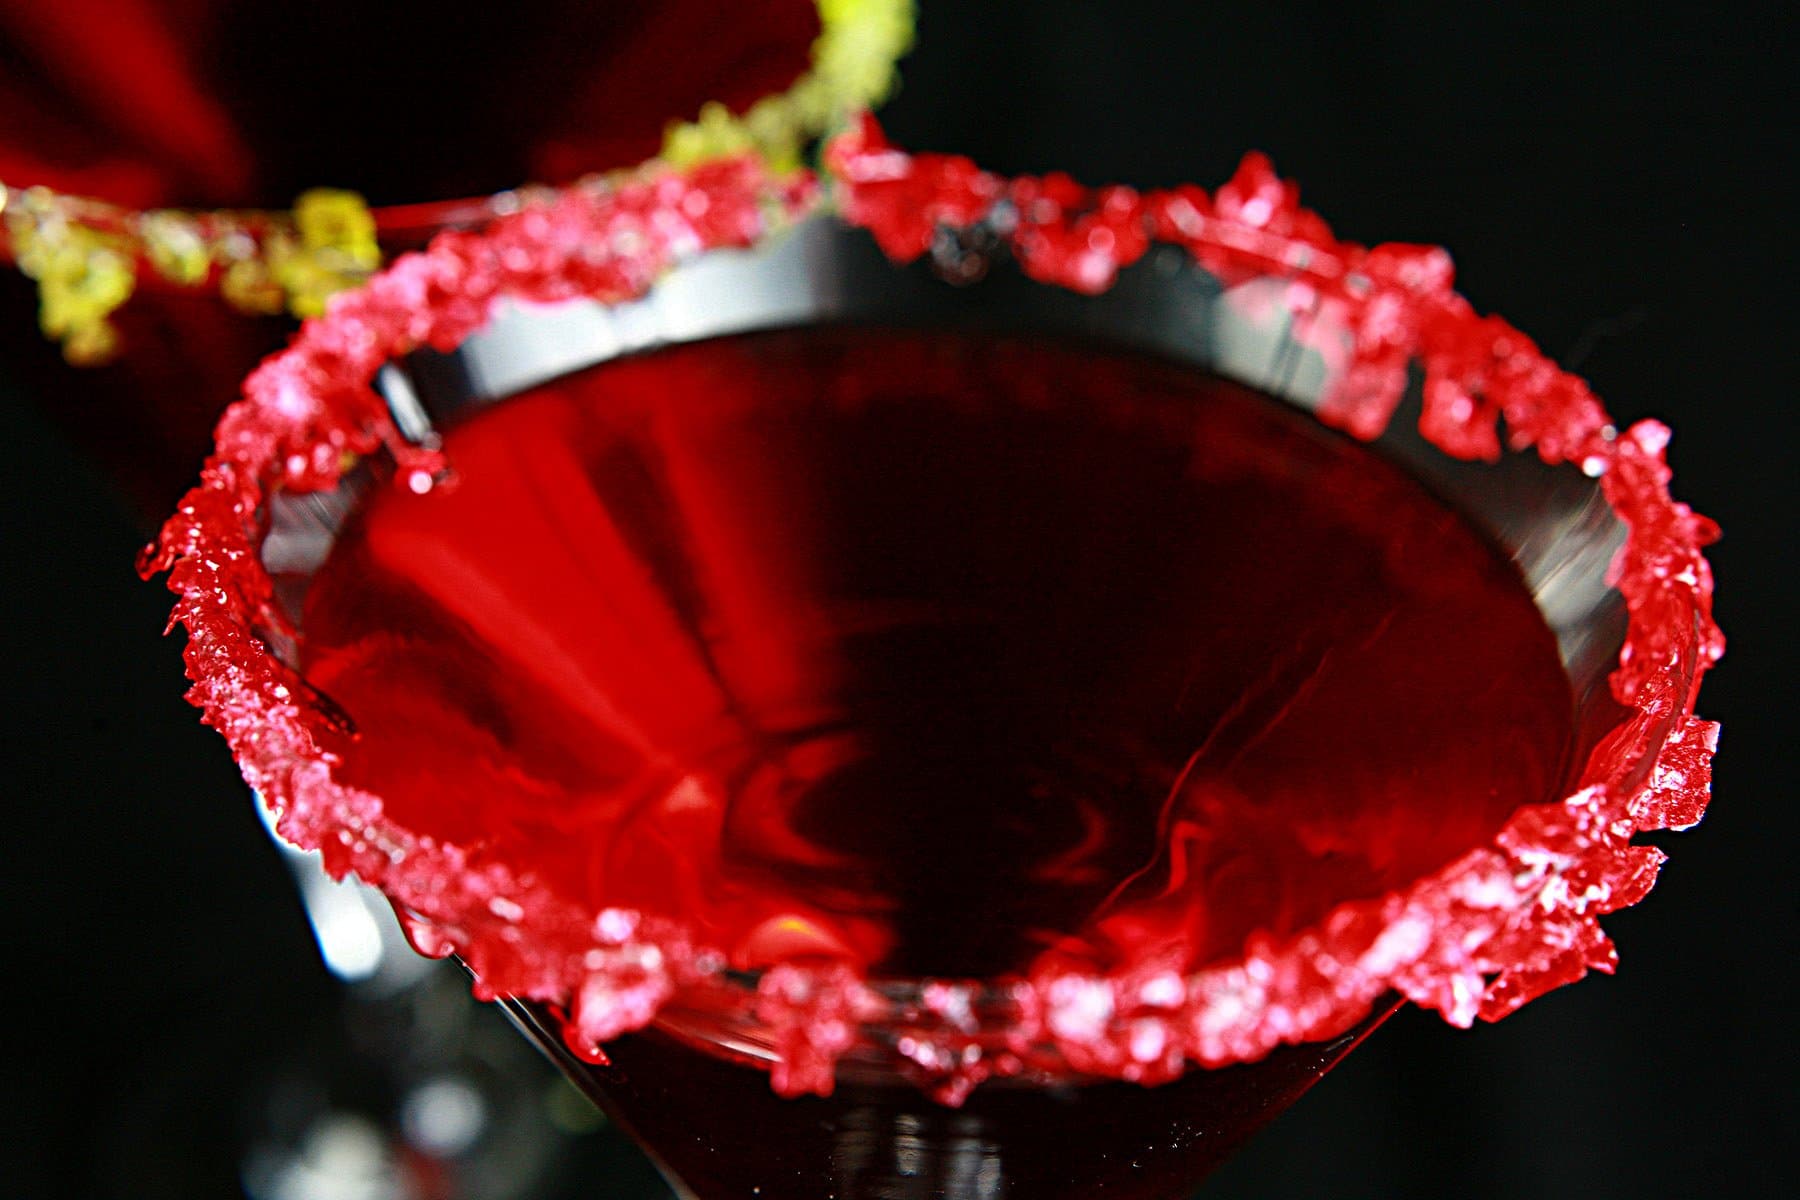 Two Martini cocktails - a Red drink in a martini glass. One is rimmed with crushed green candy, the other is rimmed with a red crushed candy.